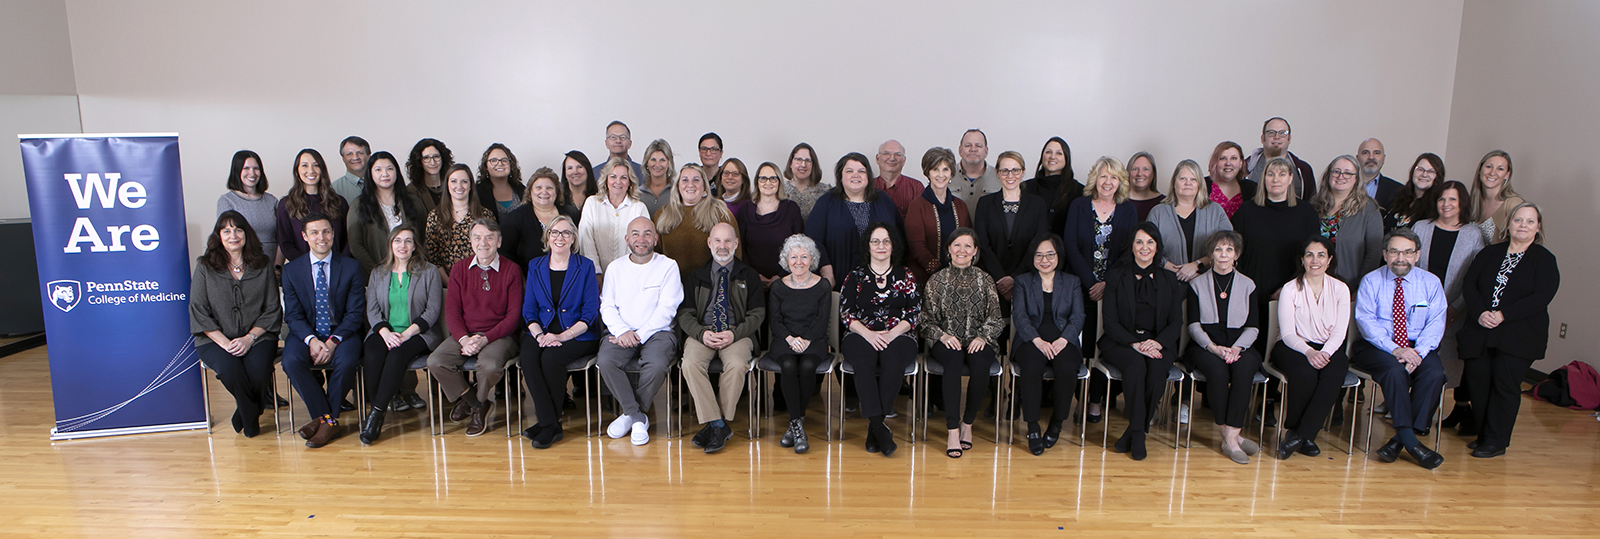 Group of about 50 people who are faculty, staff and leadership under Educational Affairs at Penn State College of Medicine